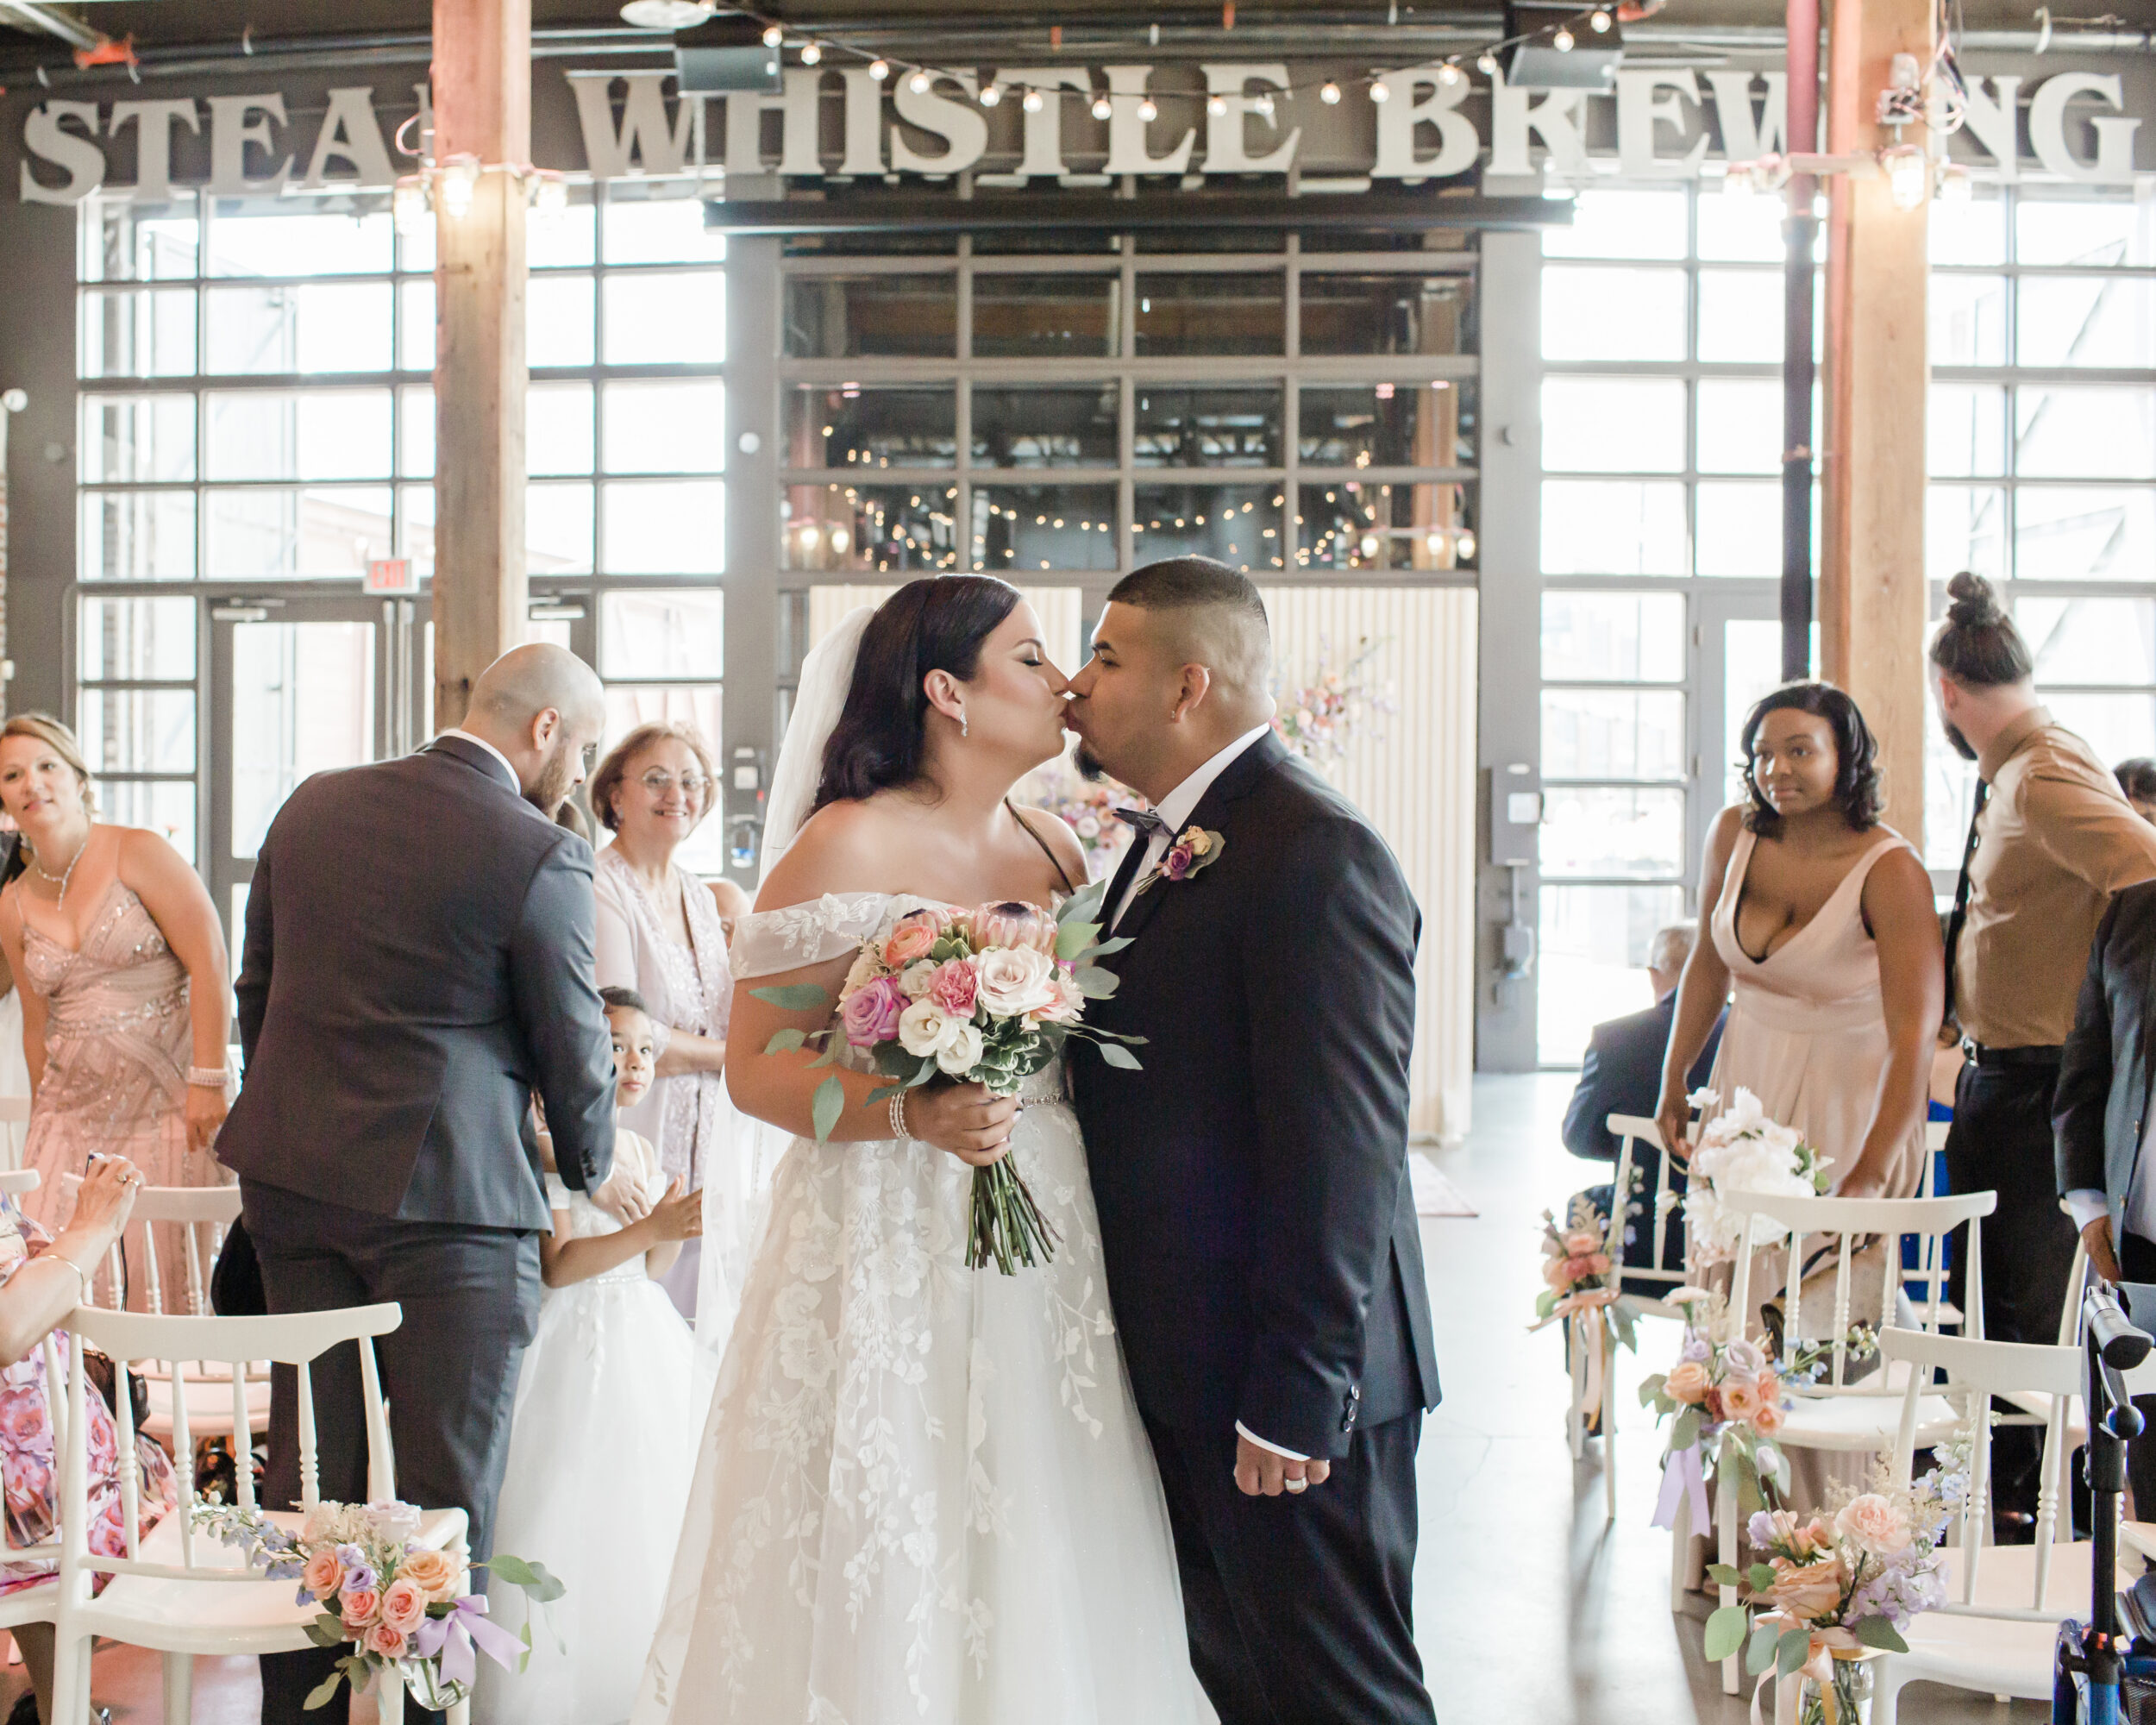 A couple kisses during their wedding ceremony at Steam Whistle Brewery.